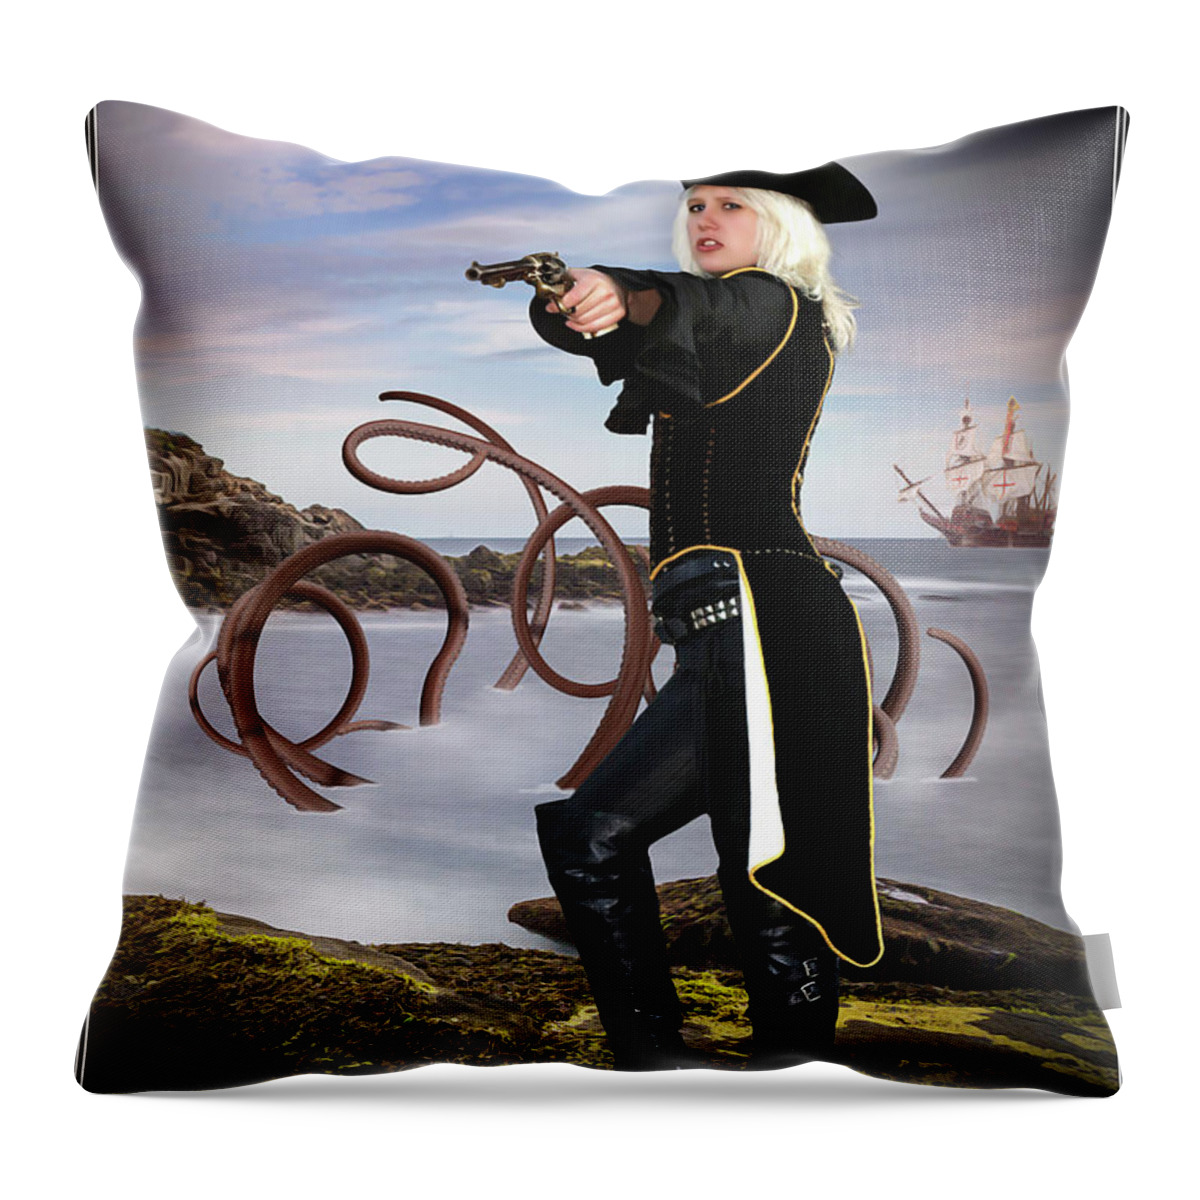 Mysterious Throw Pillow featuring the photograph Mysterious Island by Jon Volden